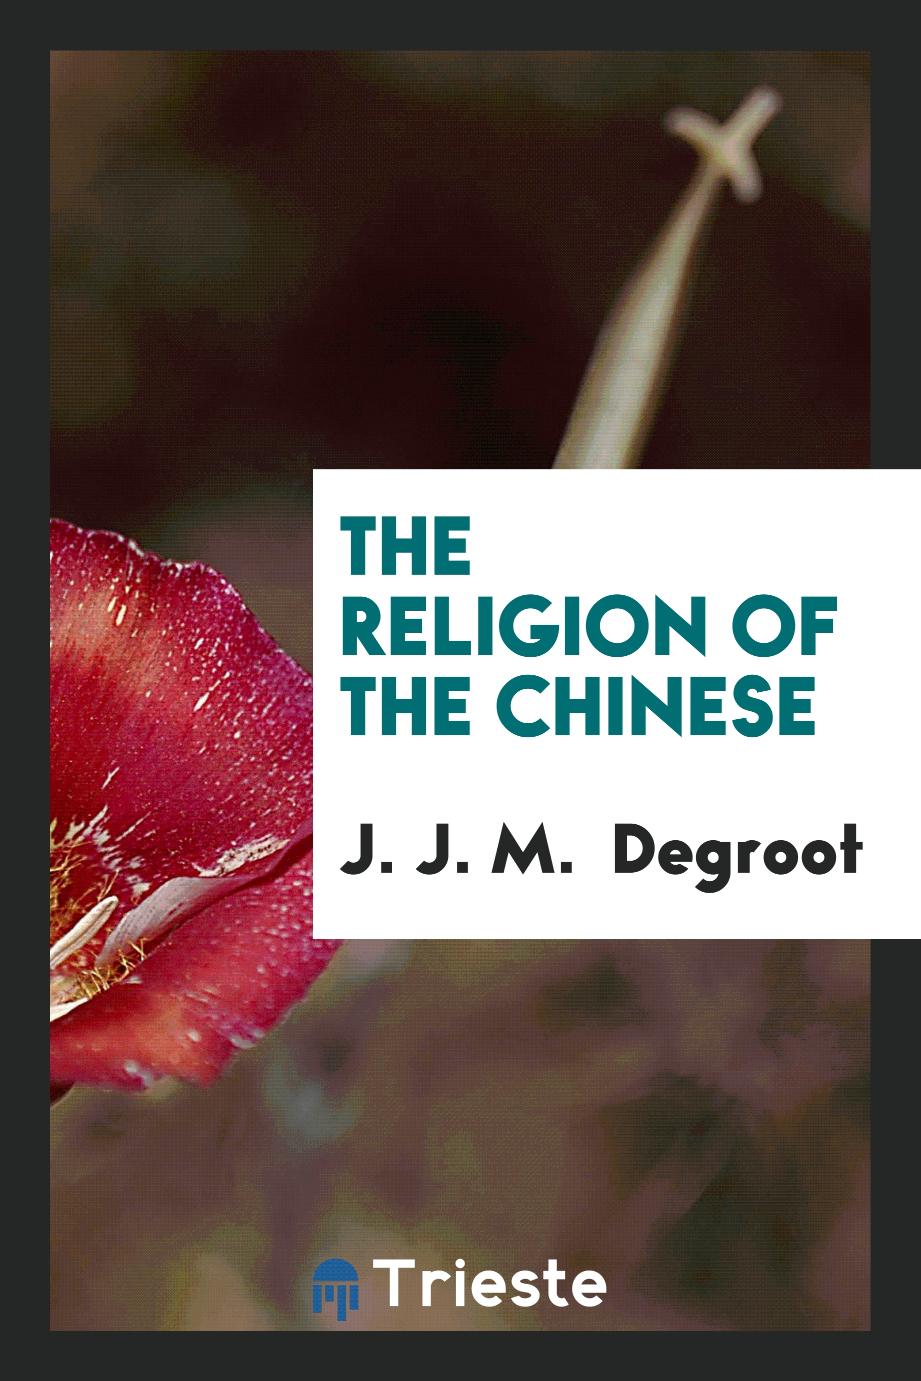 The religion of the Chinese